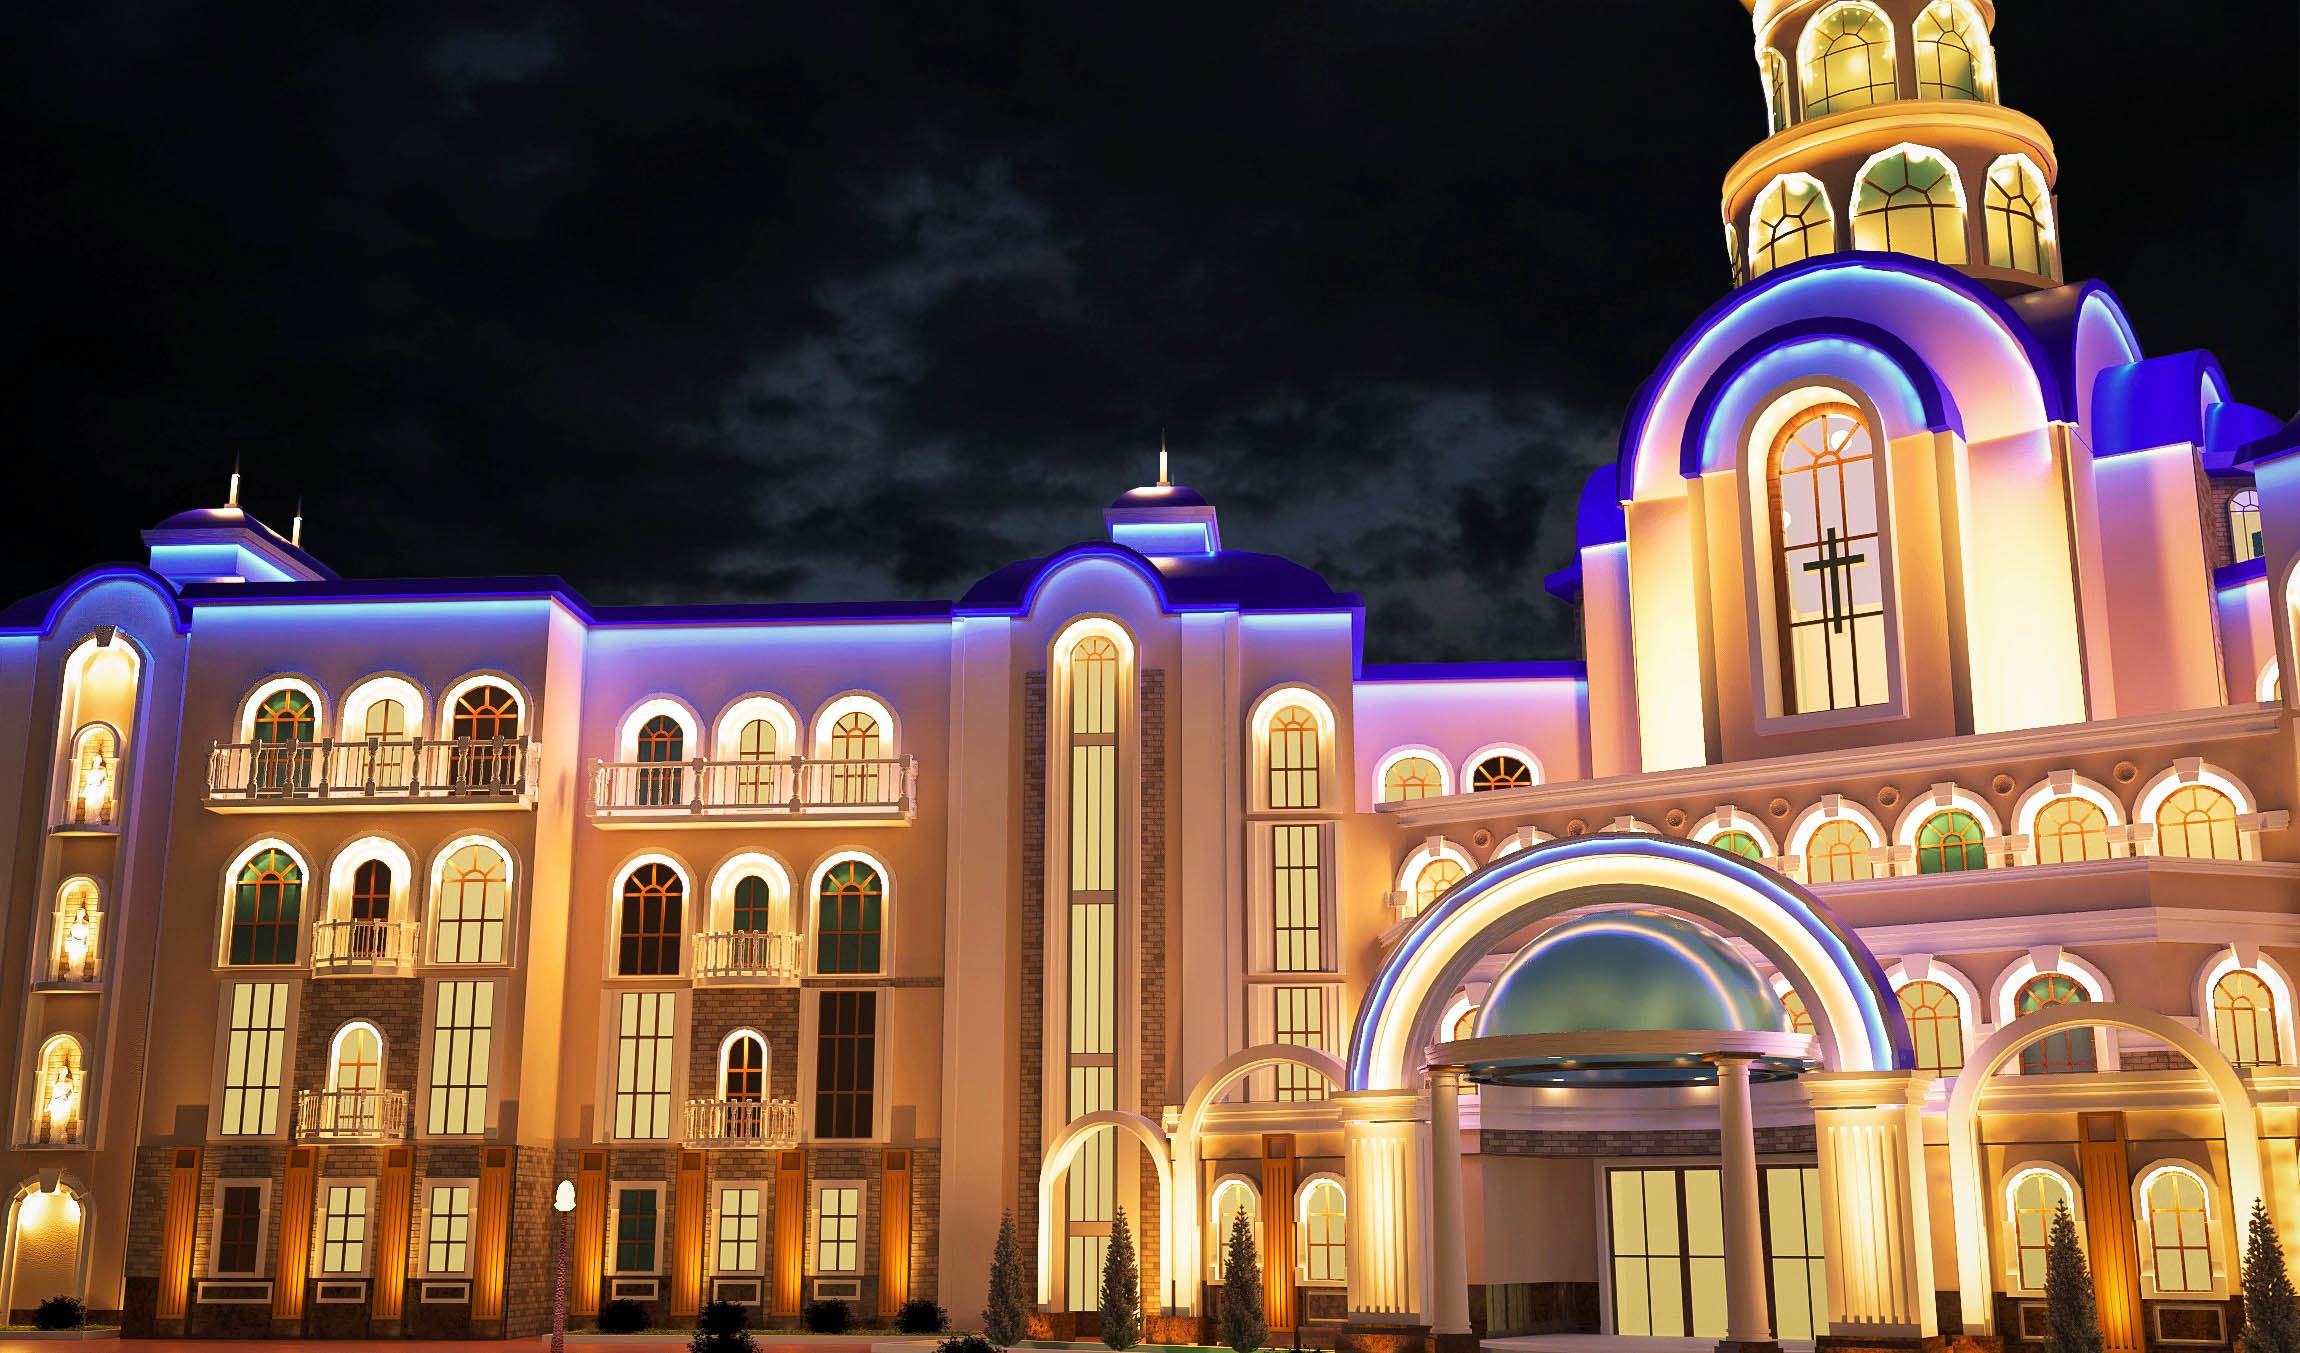 ODESSA CATHEDRAL SCHOOL (V-Ray) in 3d max vray 3.0 immagine